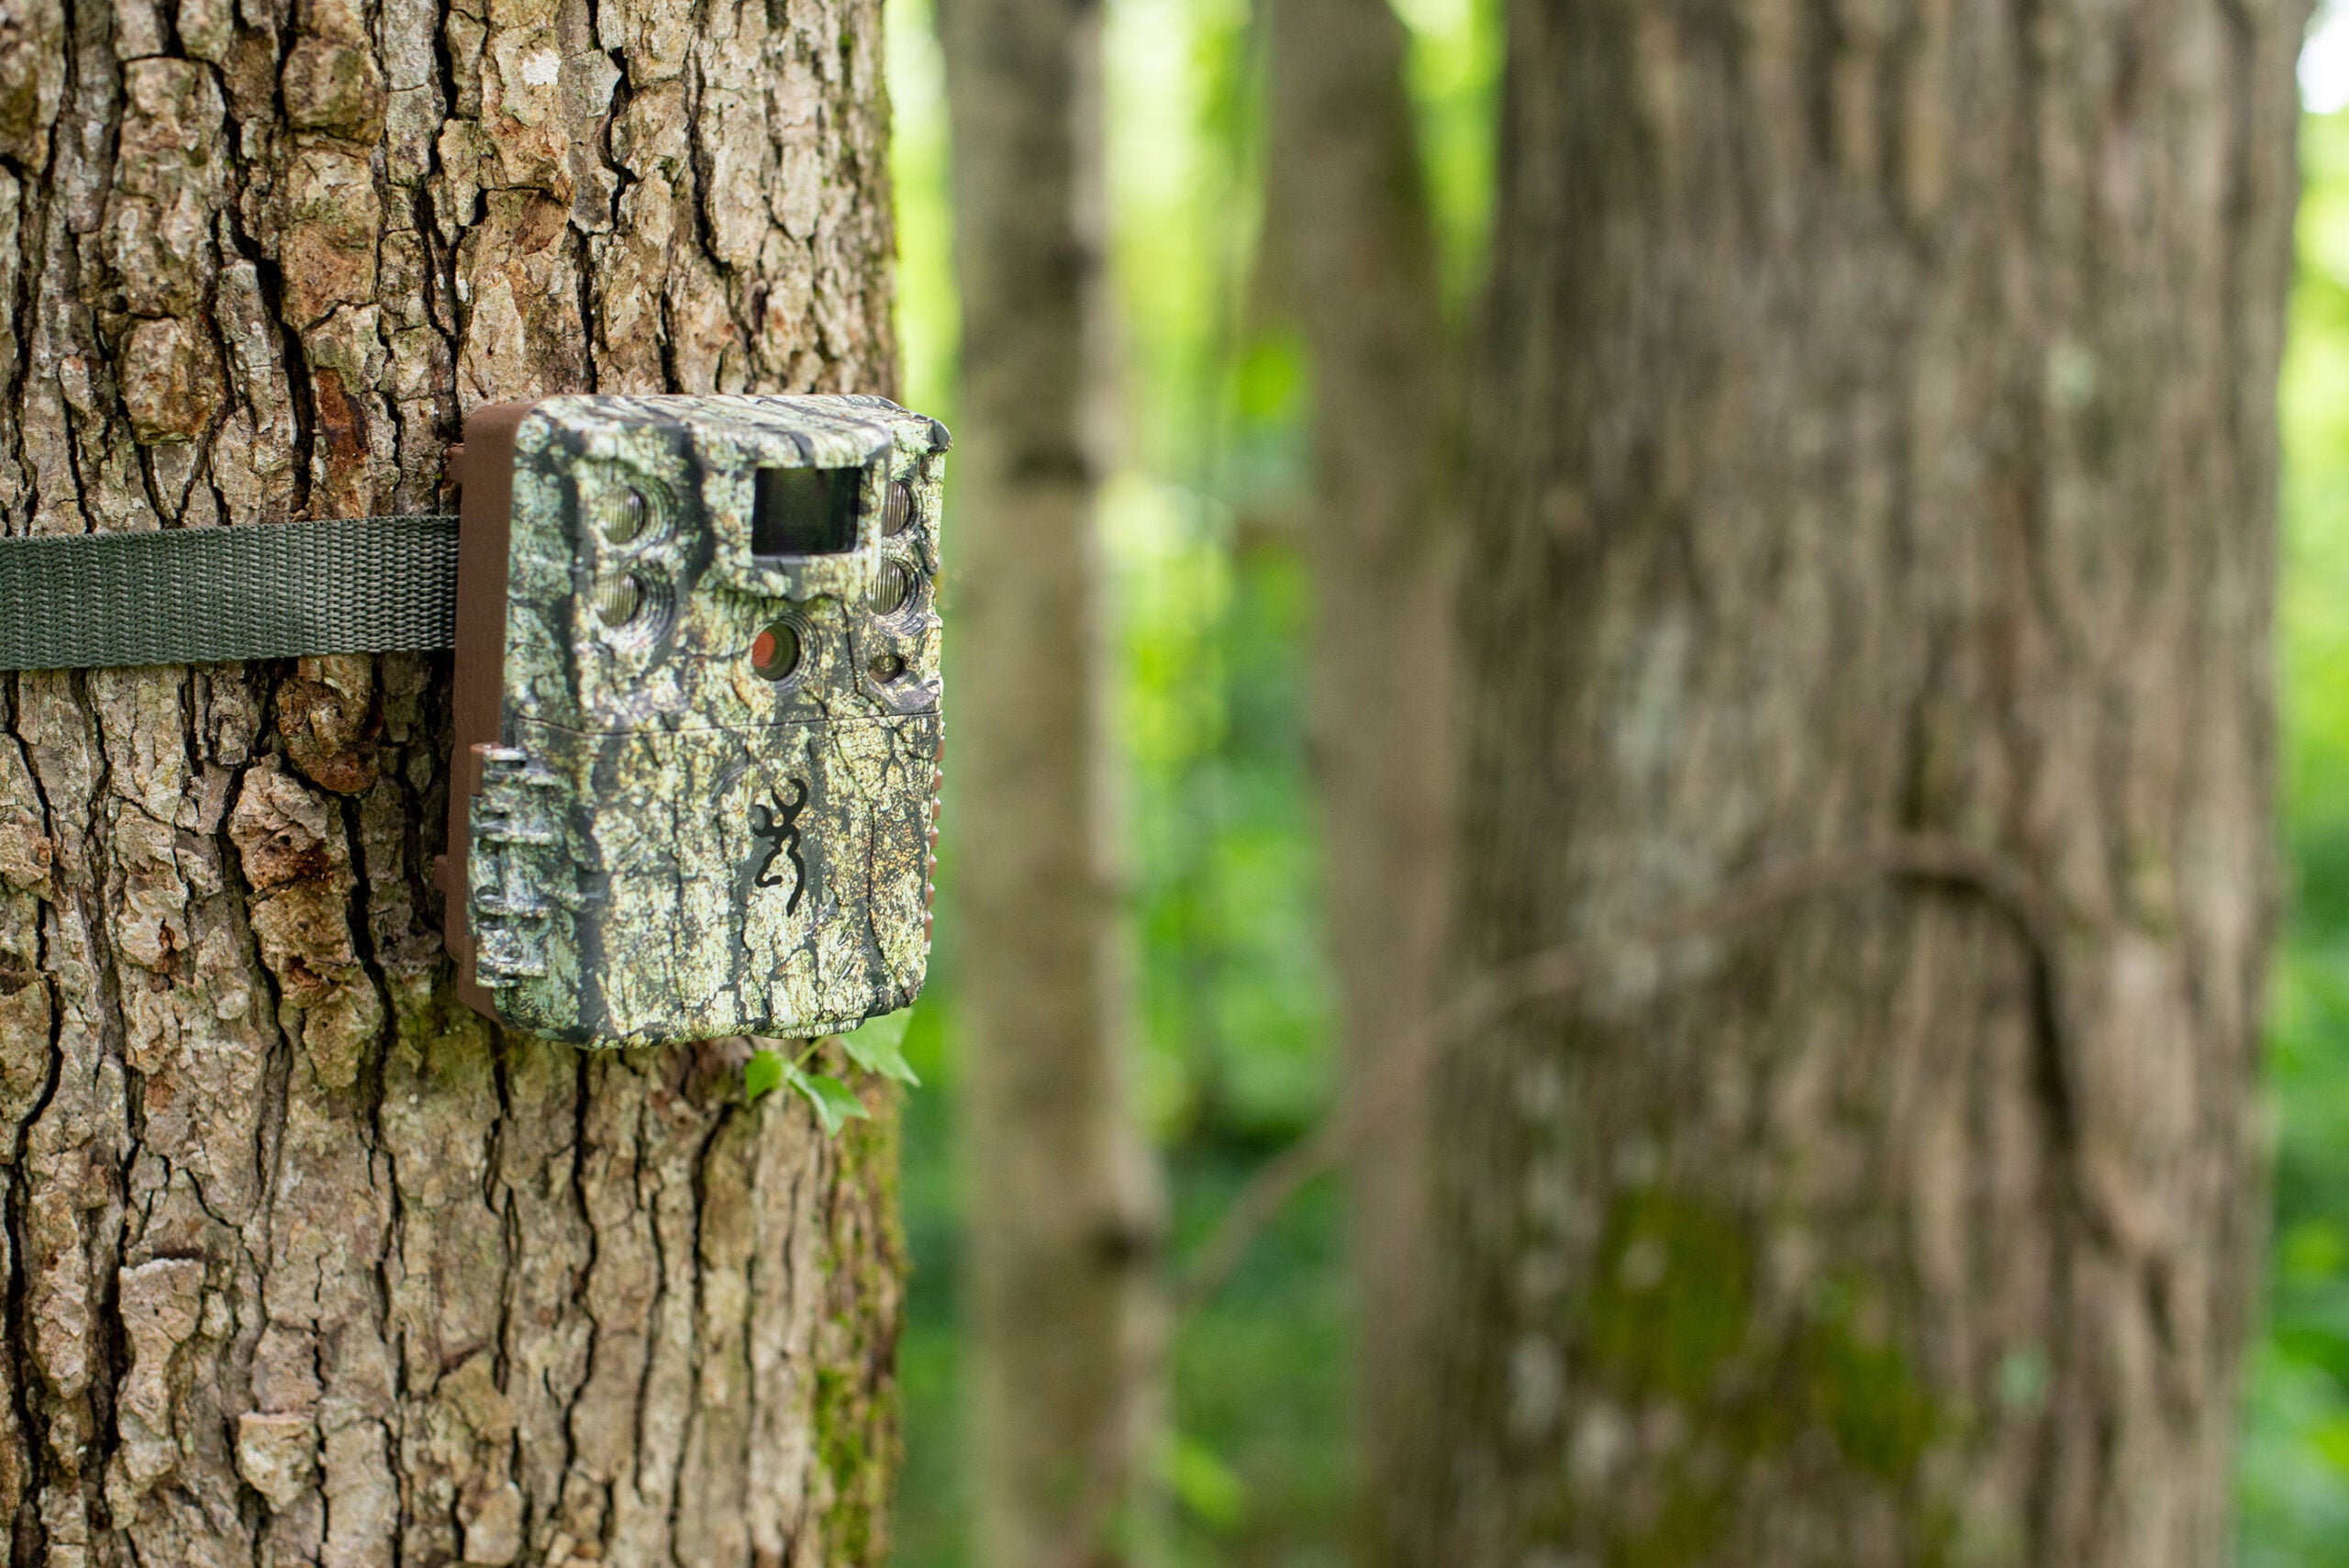 Here's how to use your trail camera.